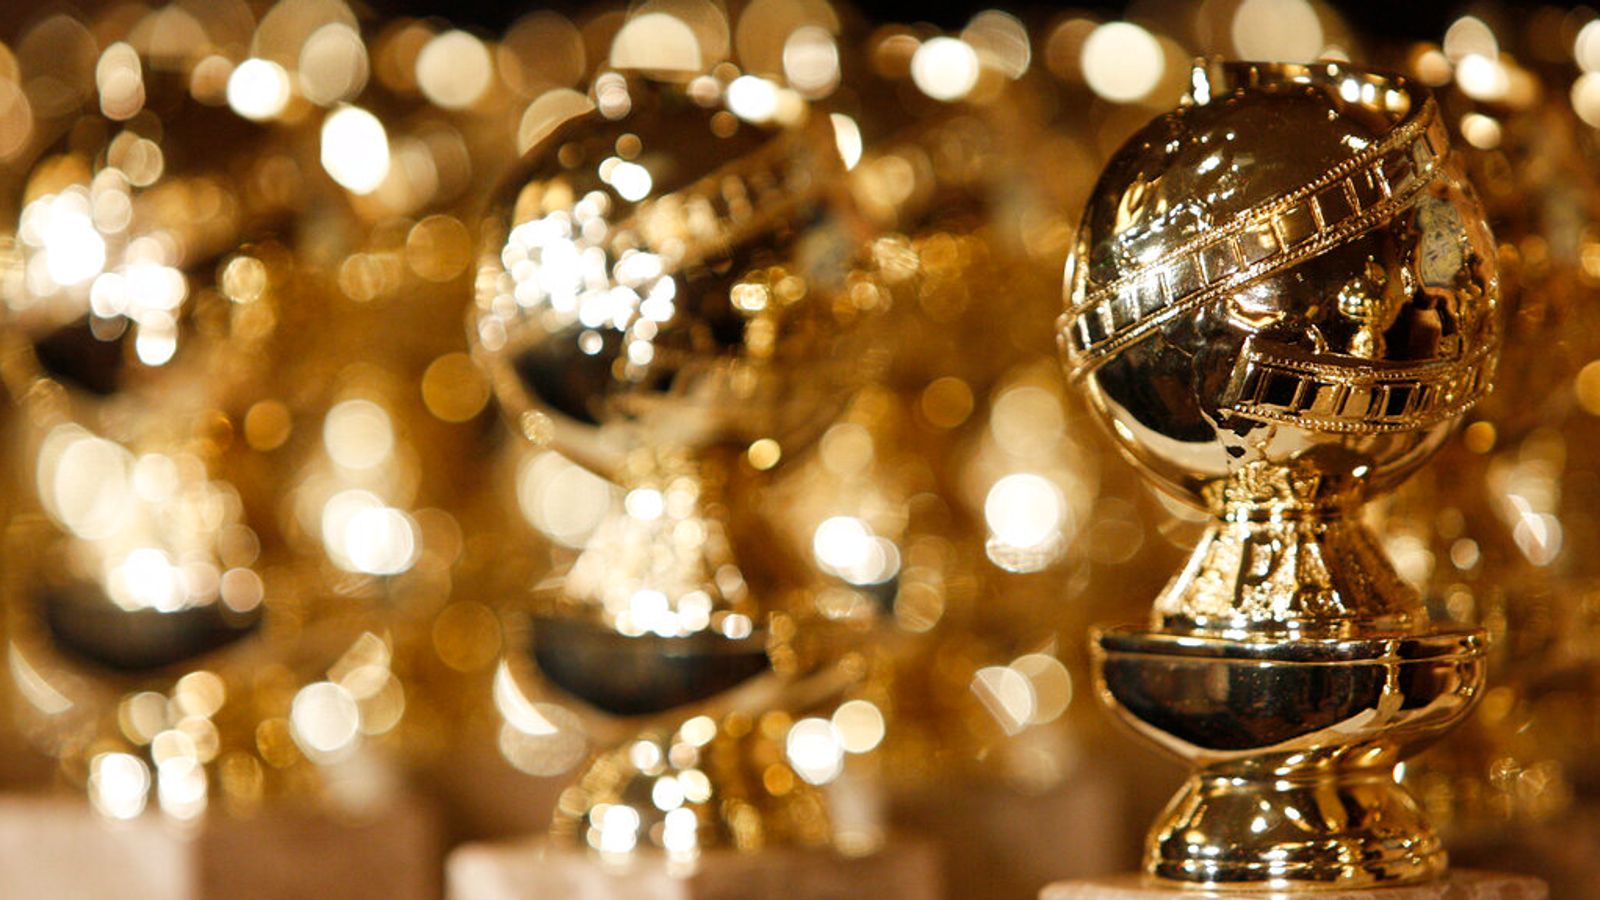 Golden Globe Awards organisers Hollywood Foreign Press Association winding down after controversial few years